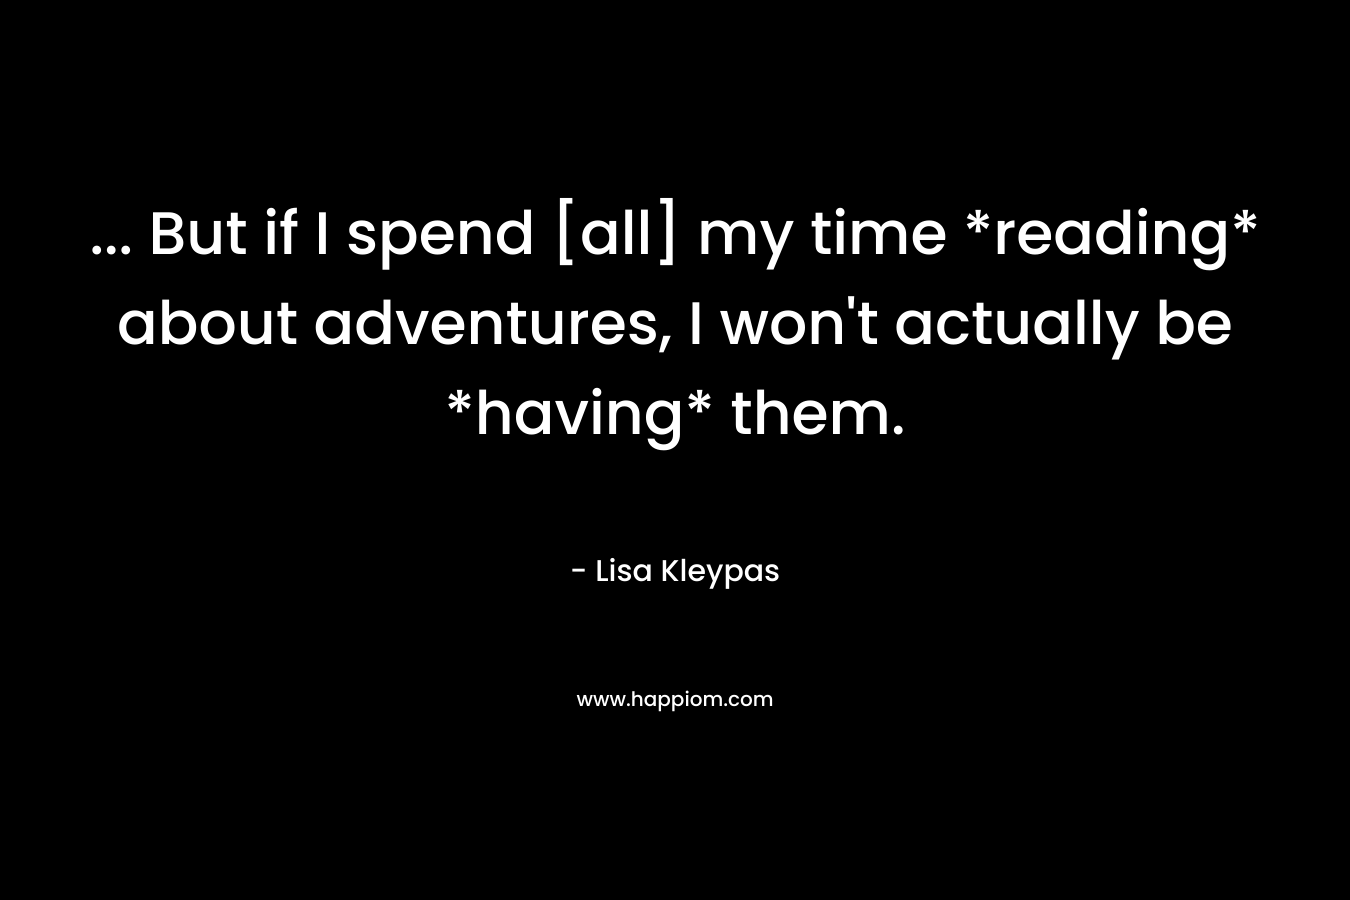 ... But if I spend [all] my time *reading* about adventures, I won't actually be *having* them.